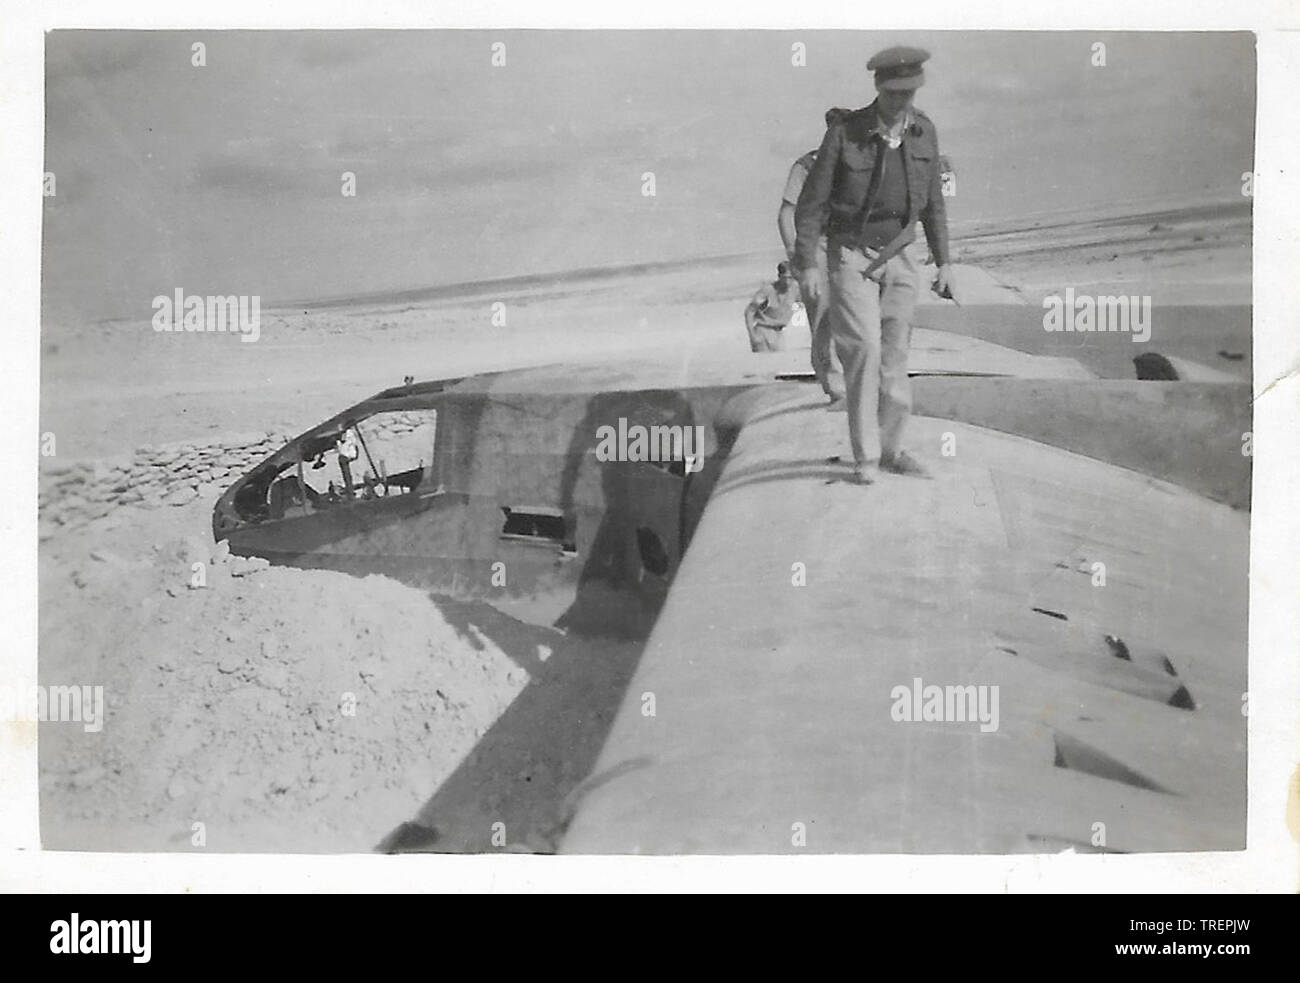 Salvaging crashed aircraft Sudan. Taken in 1943/44 by Flt Sgt Gleed RAF WW2 223 Squadron, Stock Photo